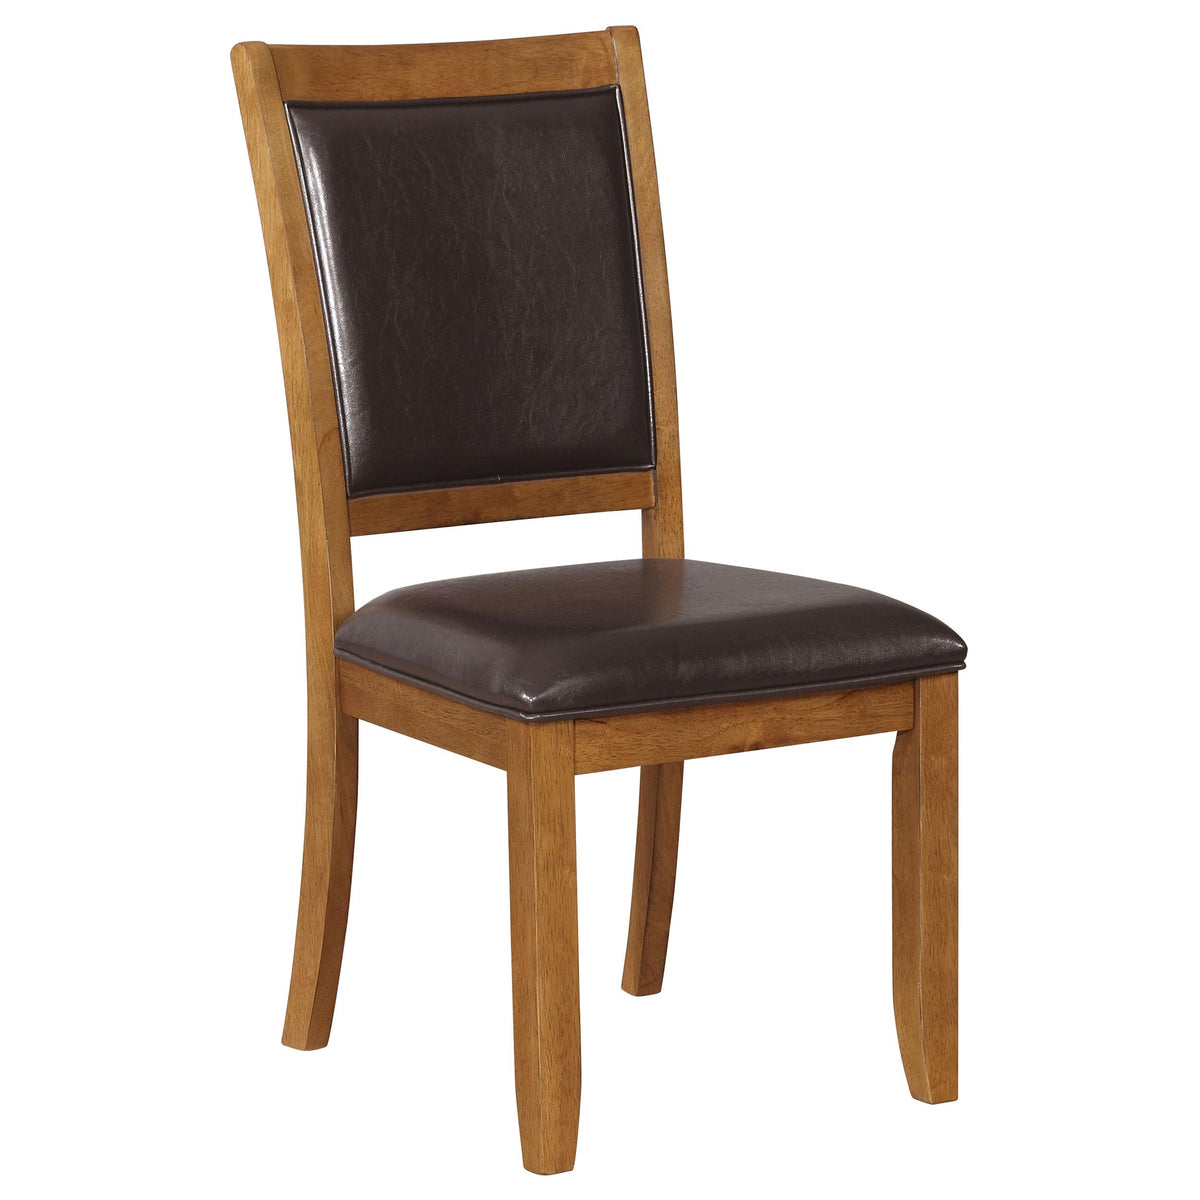 Nelms Upholstered Side Chairs Deep Brown and Dark Brown (Set of 2) Nelms Upholstered Side Chairs Deep Brown and Dark Brown (Set of 2) Half Price Furniture